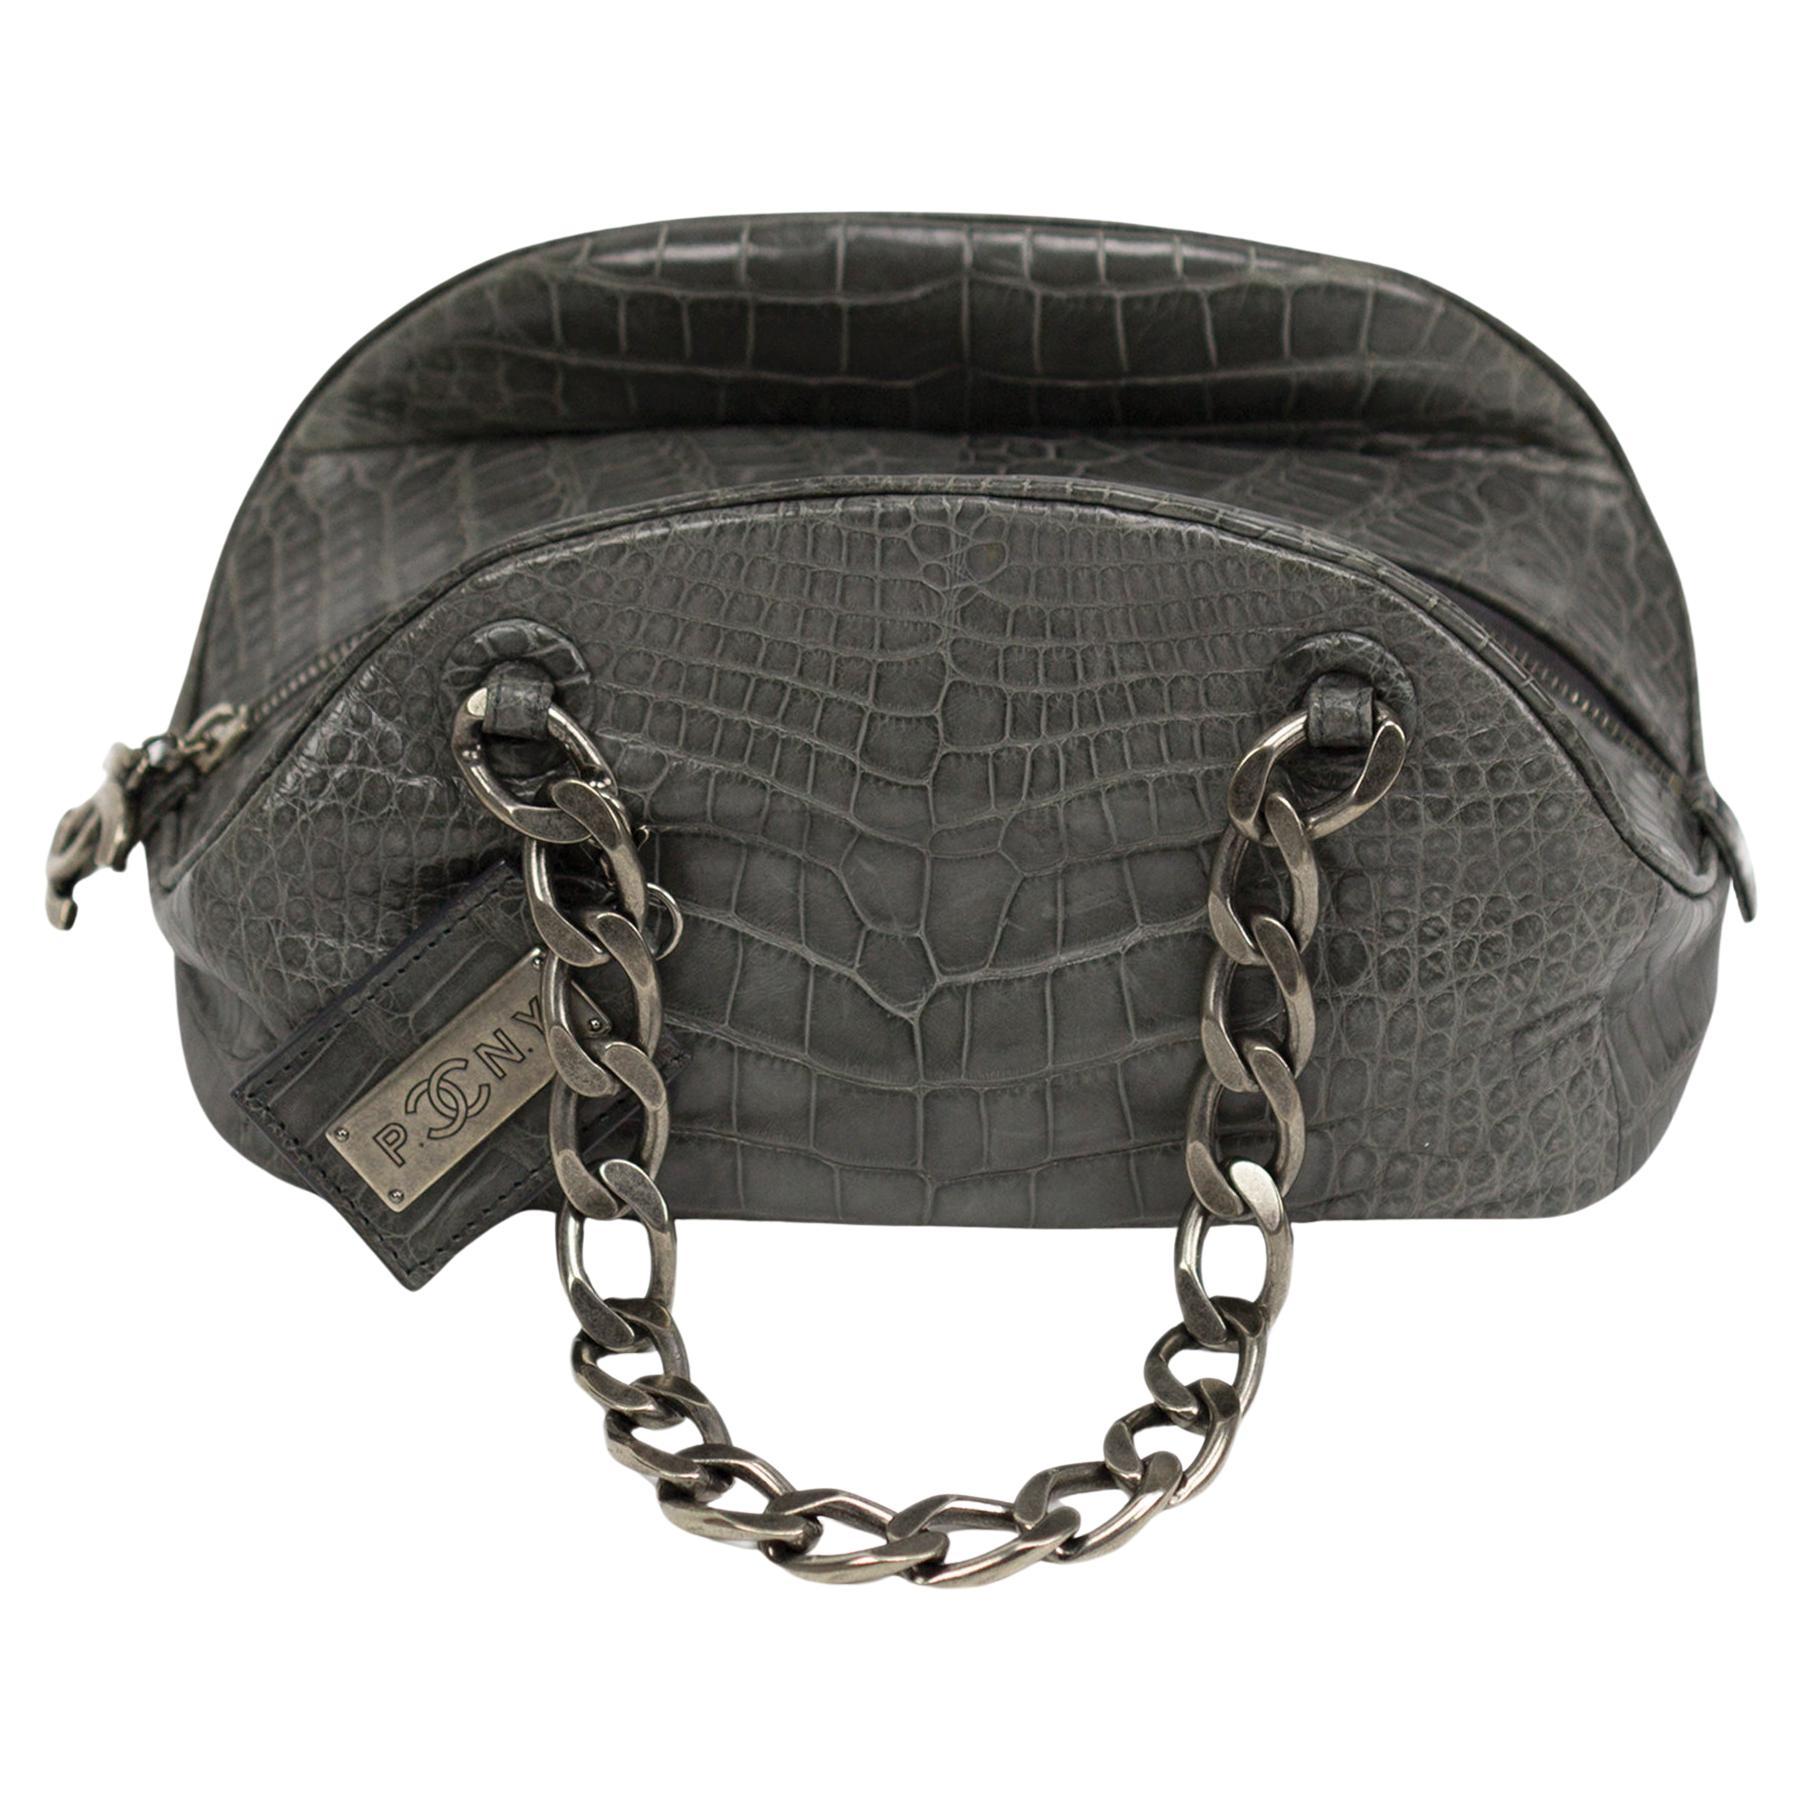 Chanel Bowling Bag Exotic Bowler Paris NY Grey Crocodile Skin Leather Satchel For Sale